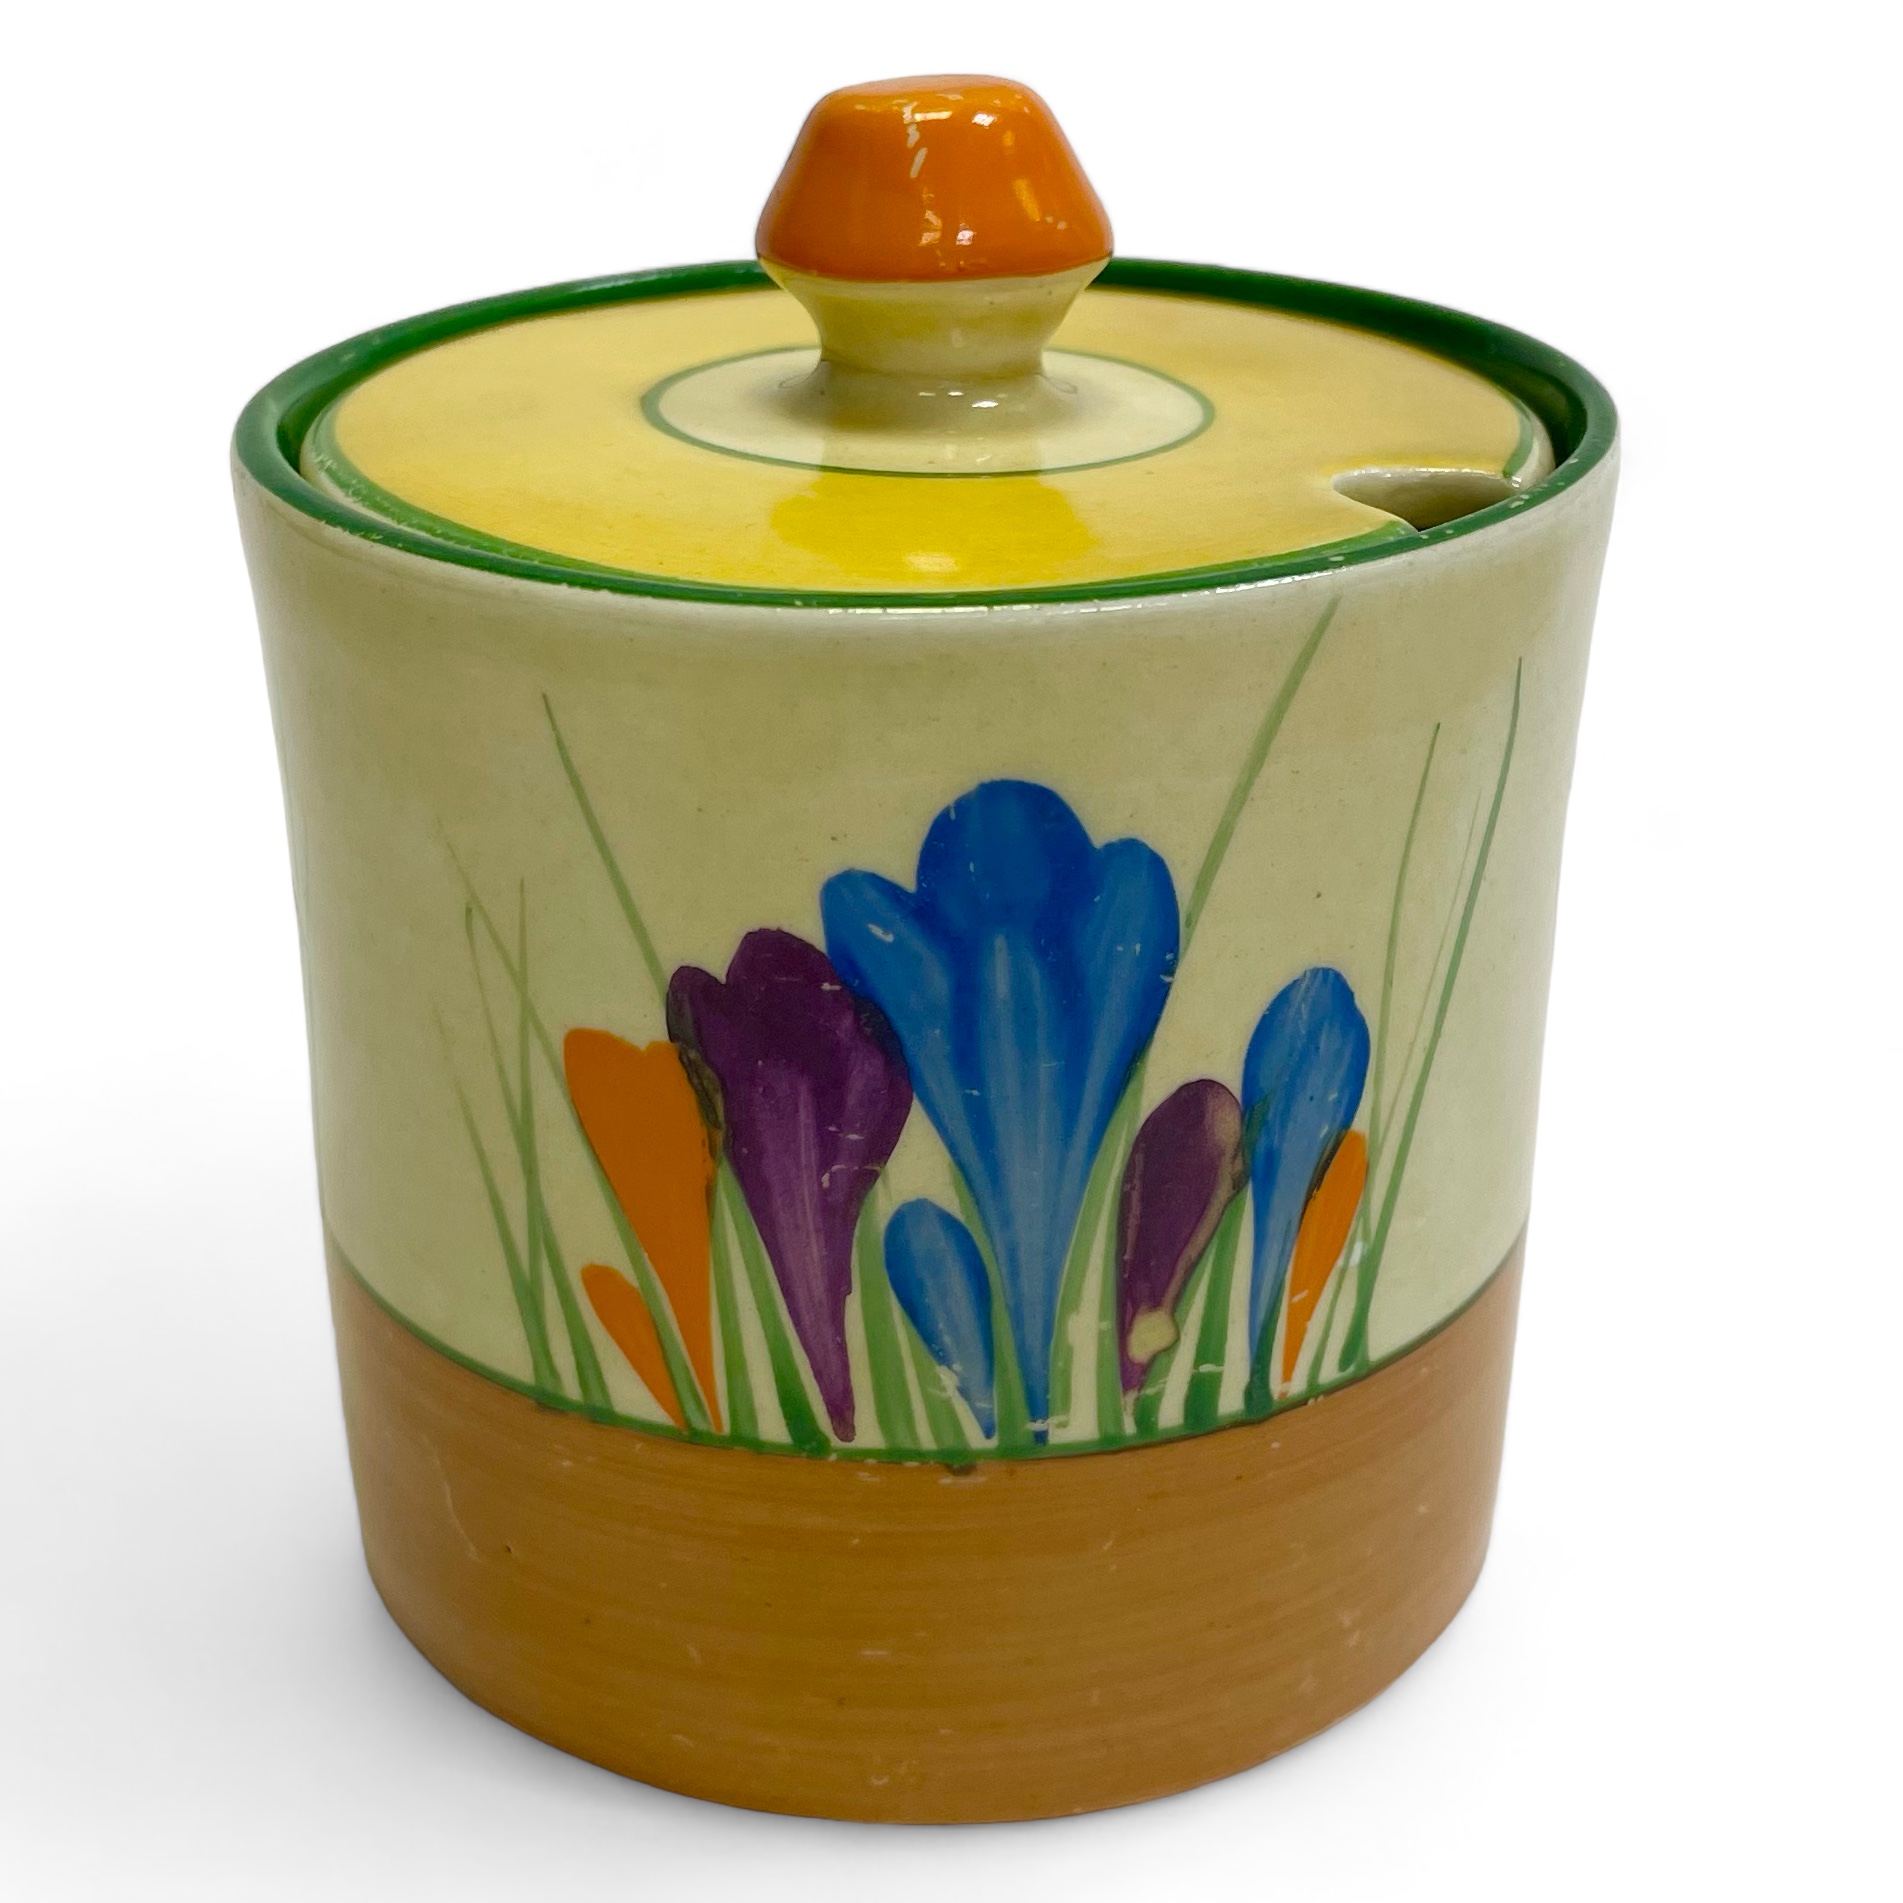 A Clarice Cliff Crocus pattern preserve pot. Approximately 9cm tall. 8cm diameter. Some scratches